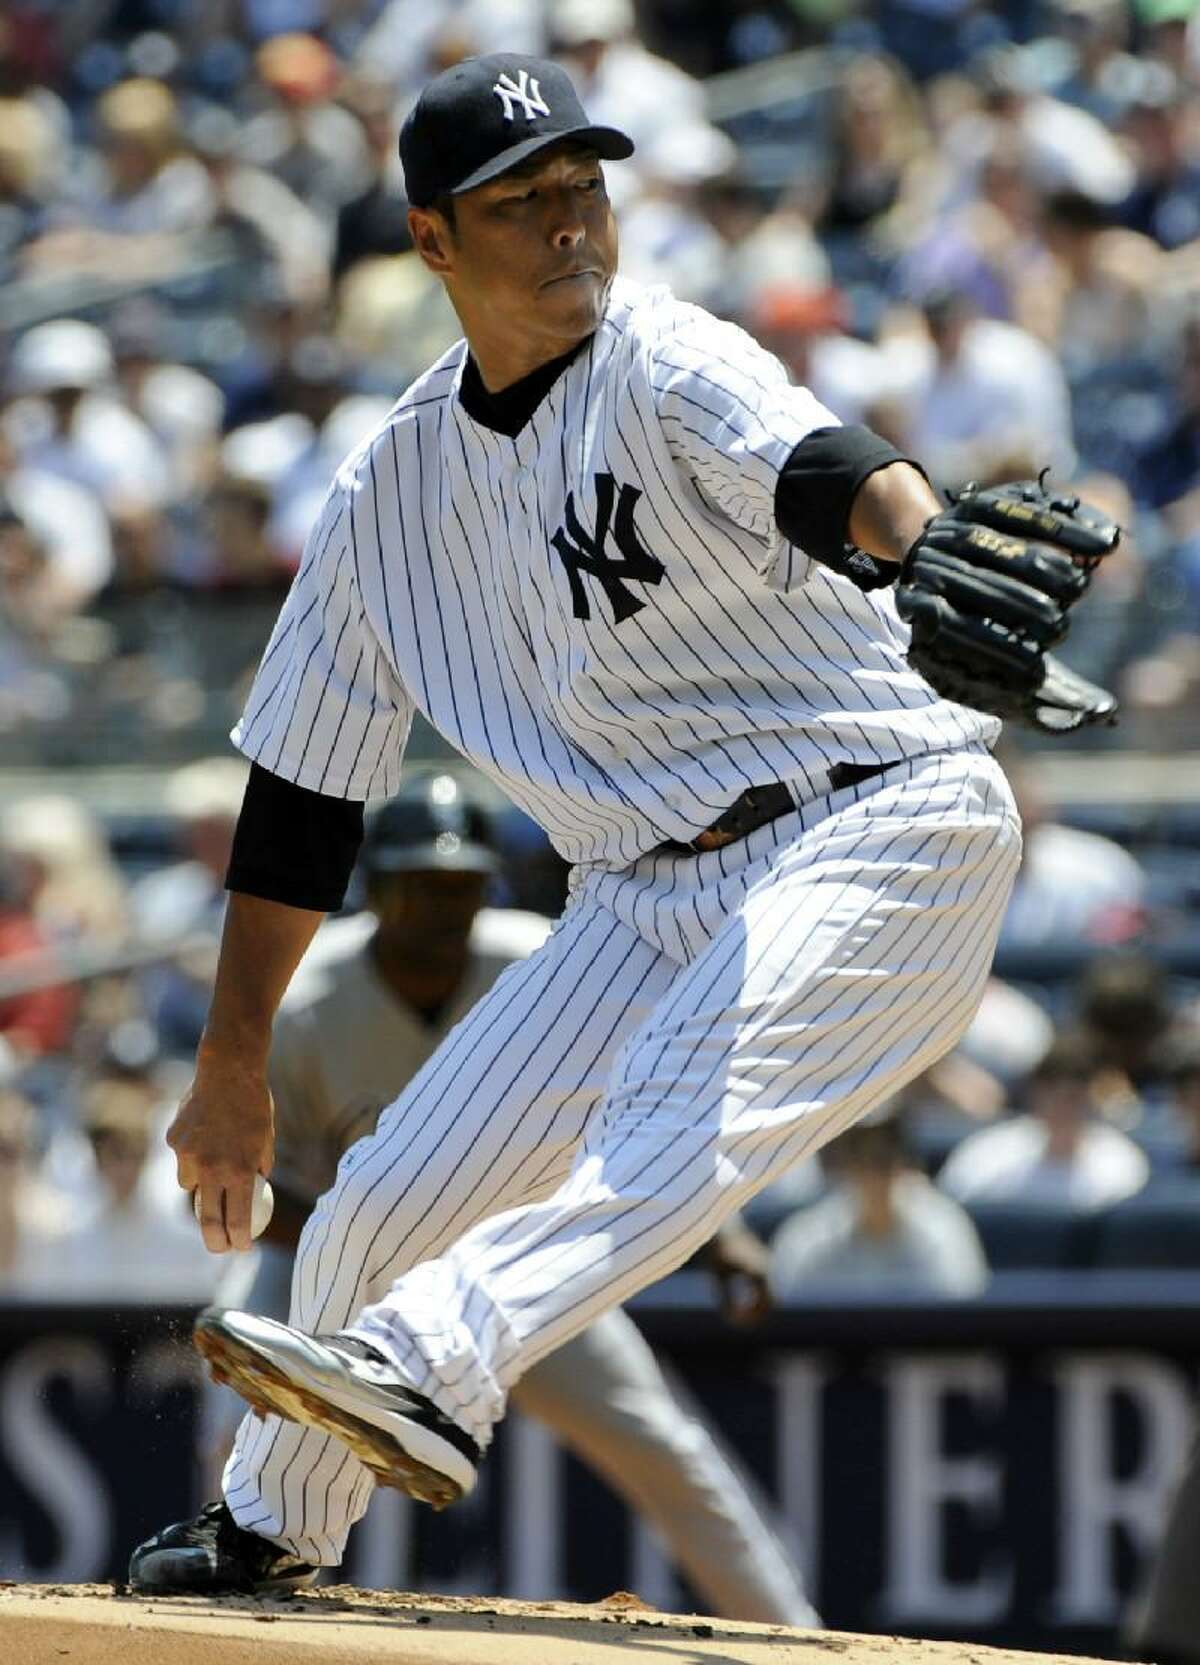 ASSOCIATED PRESS New York Yankees starter Hiroki Kuroda delivers a pitch to the Chicago White Sox during the first inning of Saturday's game at Yankee Stadium in New York. Kuroda struck out 11 and got the win as the Yankees defeated the White Sox 4-0.